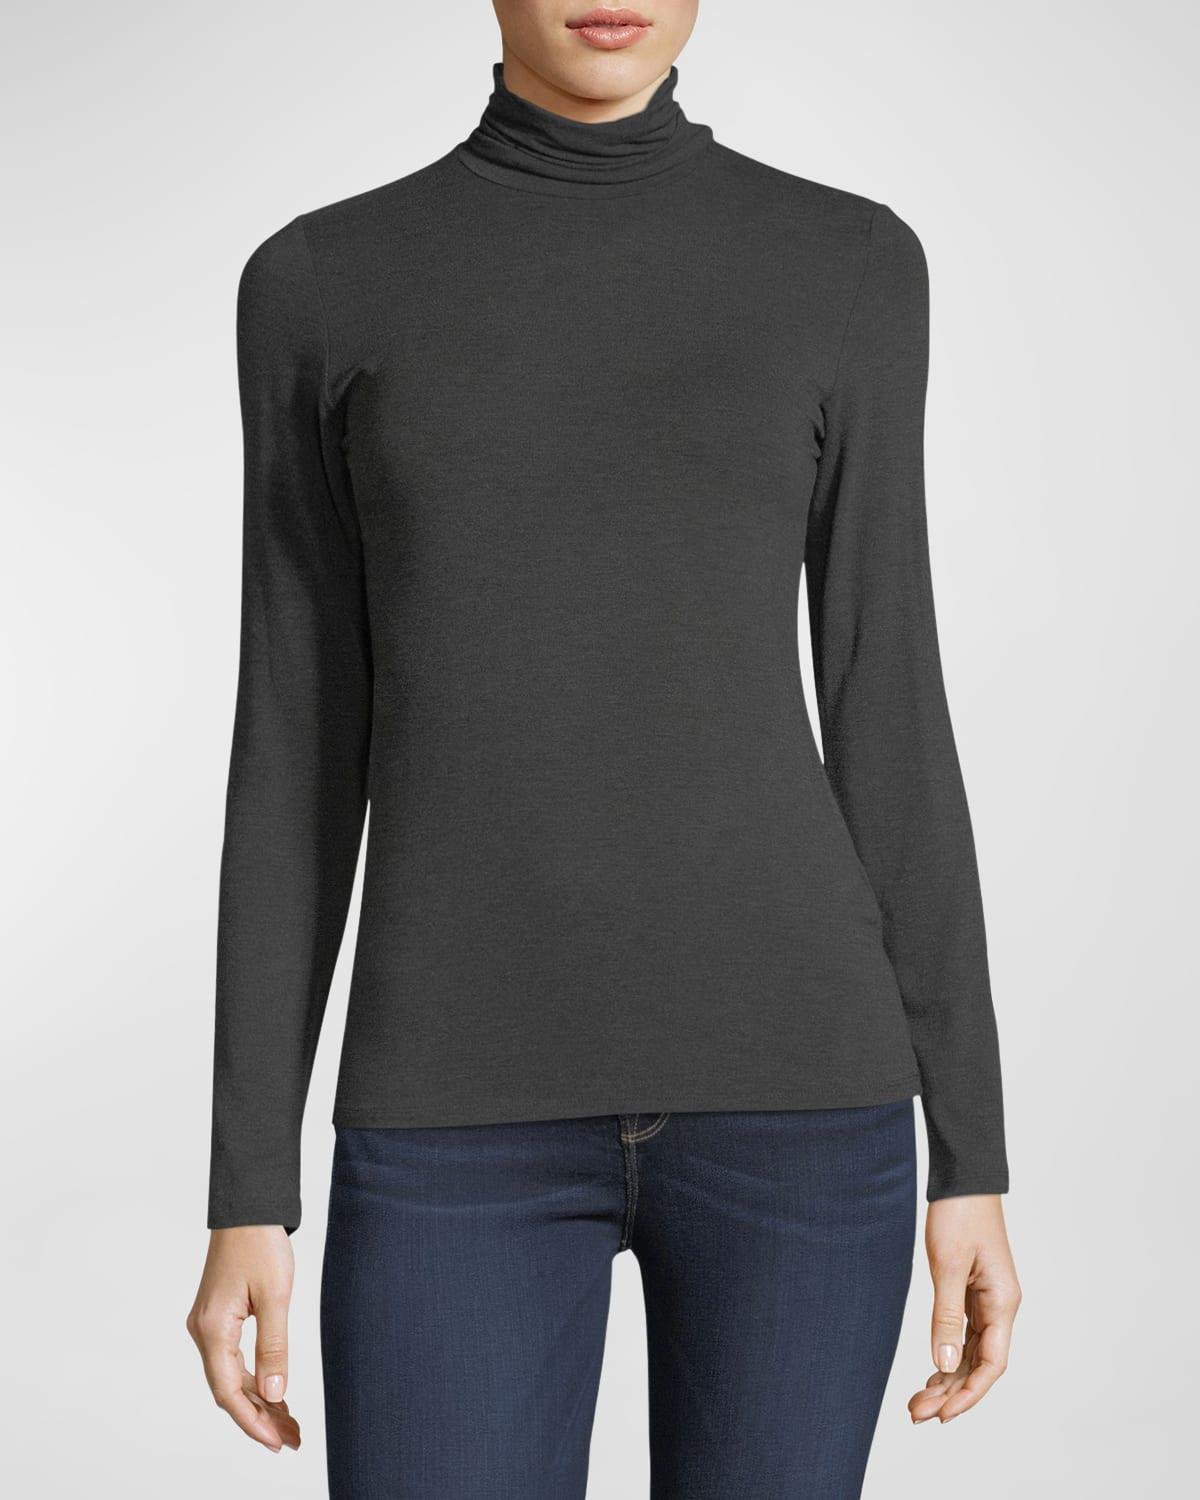 Soft Touch Long-Sleeve Turtleneck by MAJESTIC FILATURES